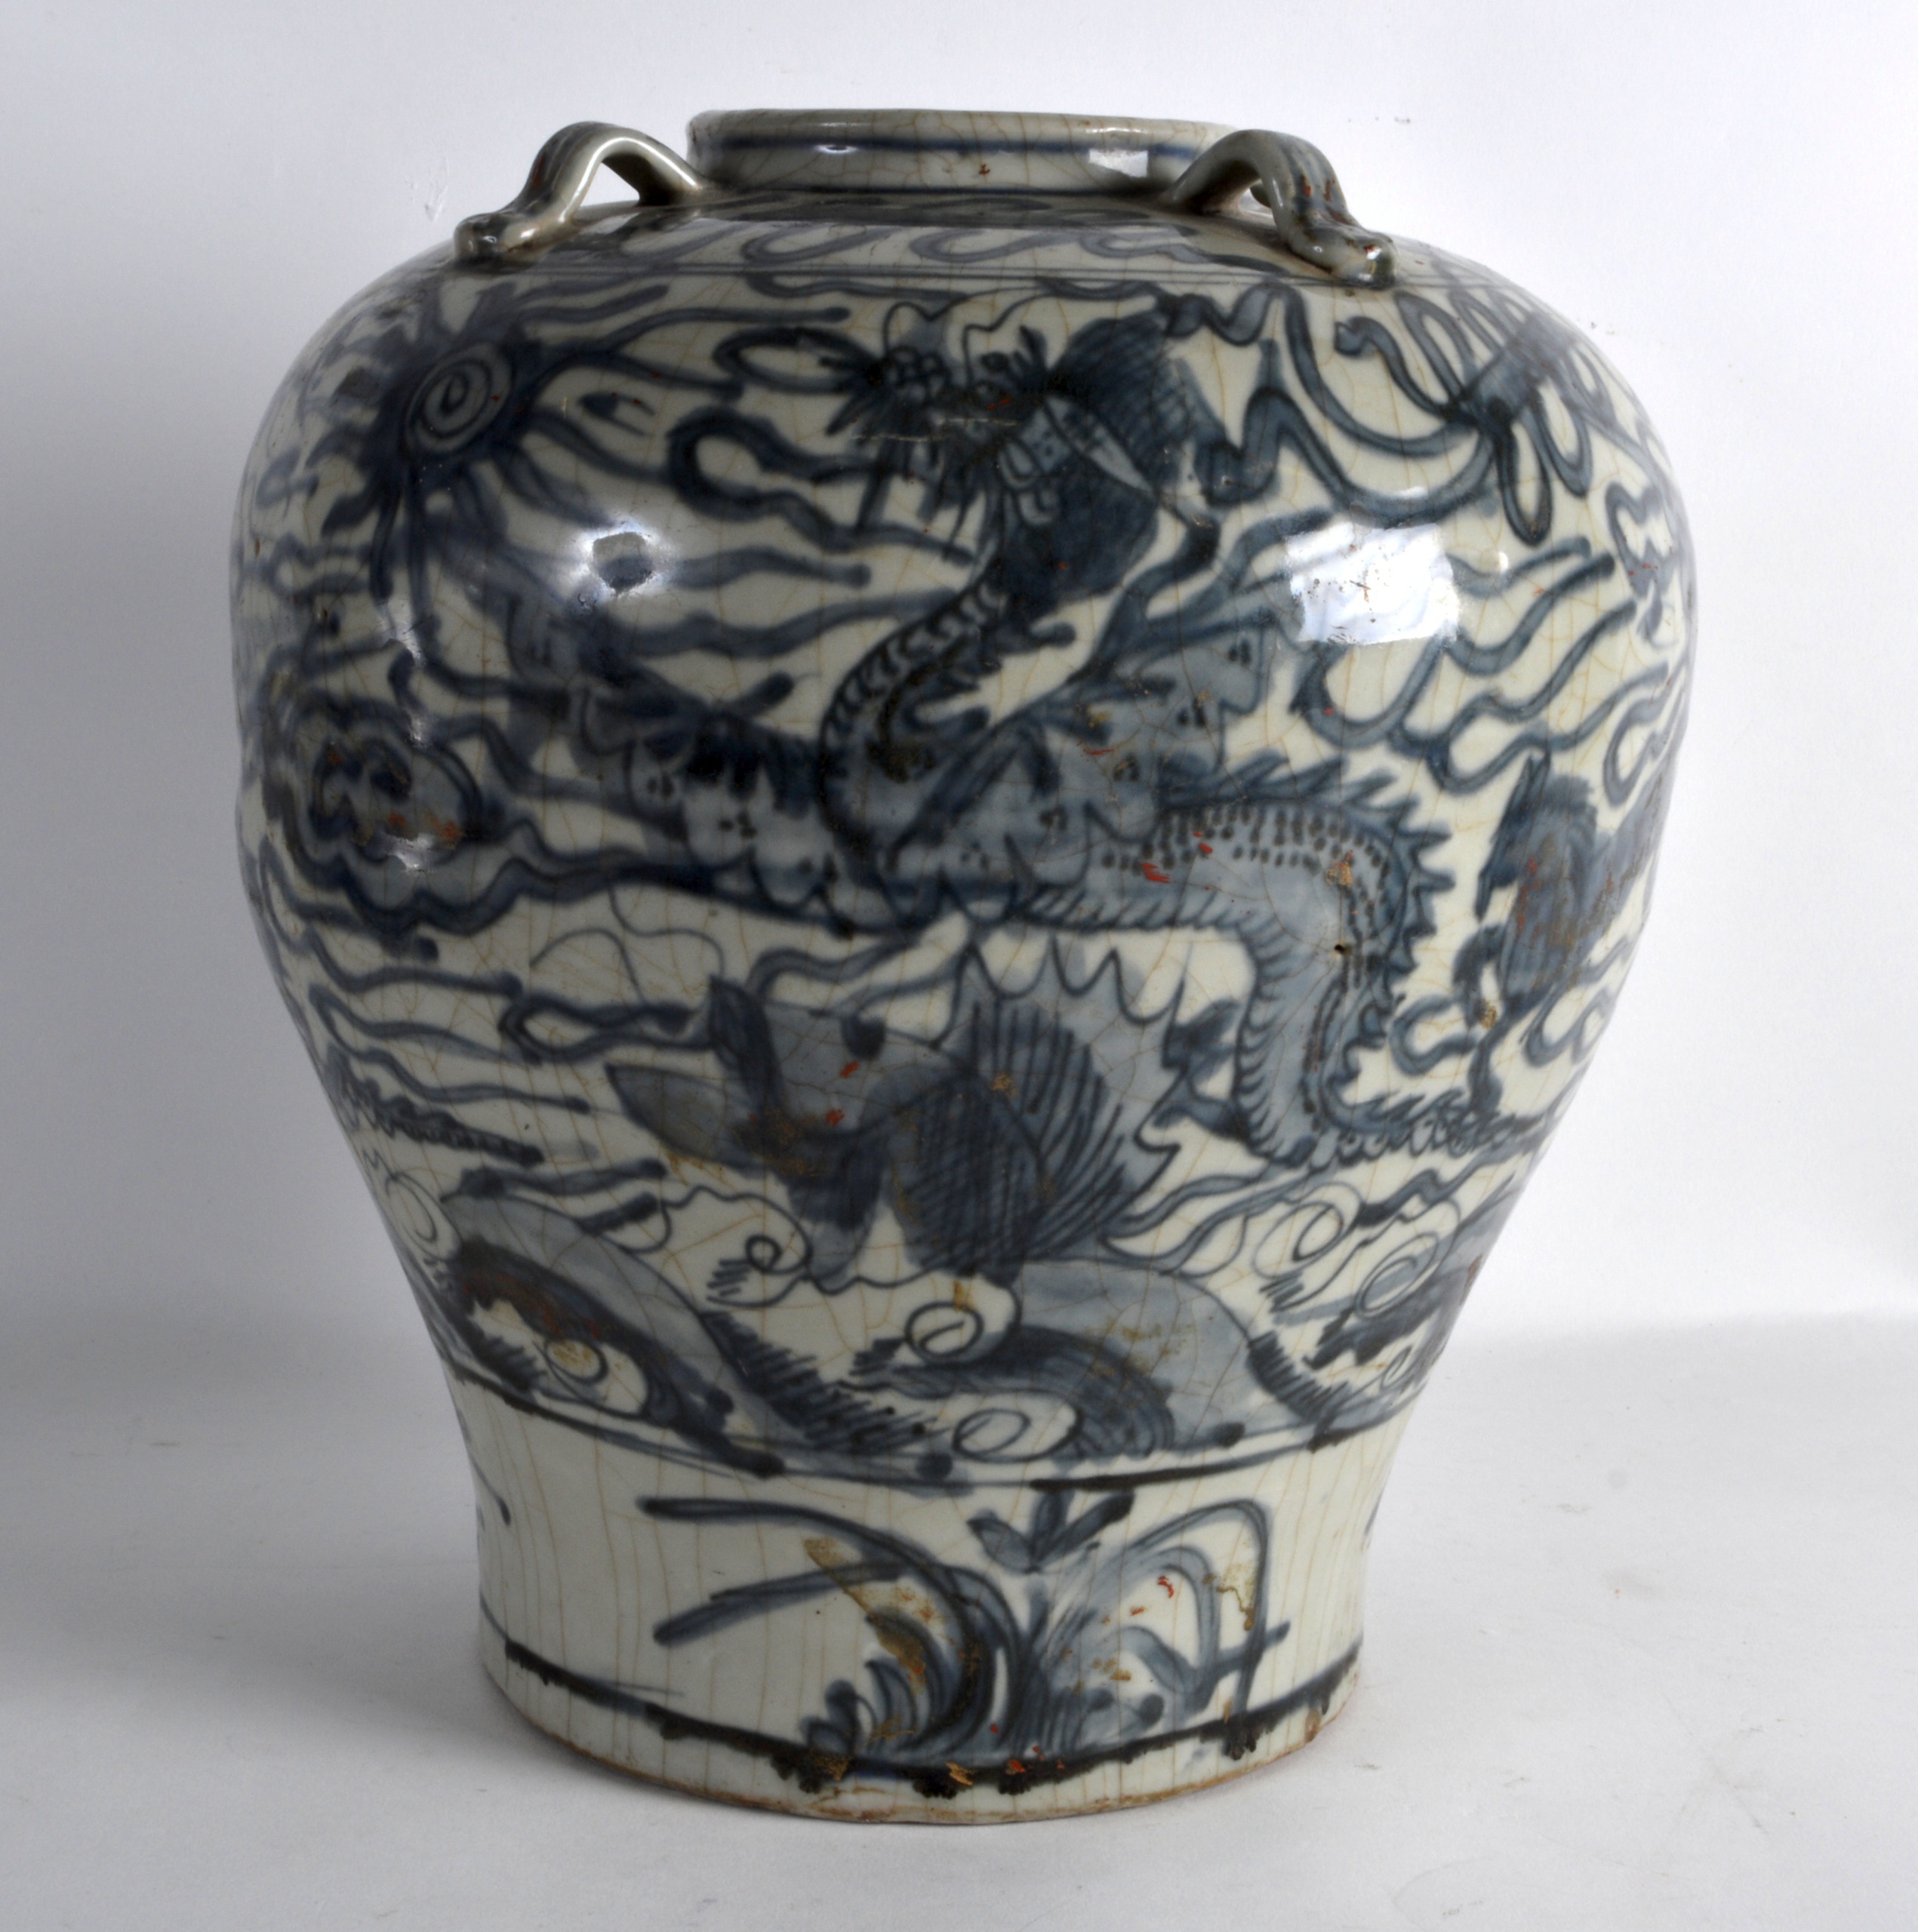 A GOOD 16TH/17TH CENTURY CHINESE BLUE AND WHITE BALUSTER JARLET Ming, painted with stylised dragons,